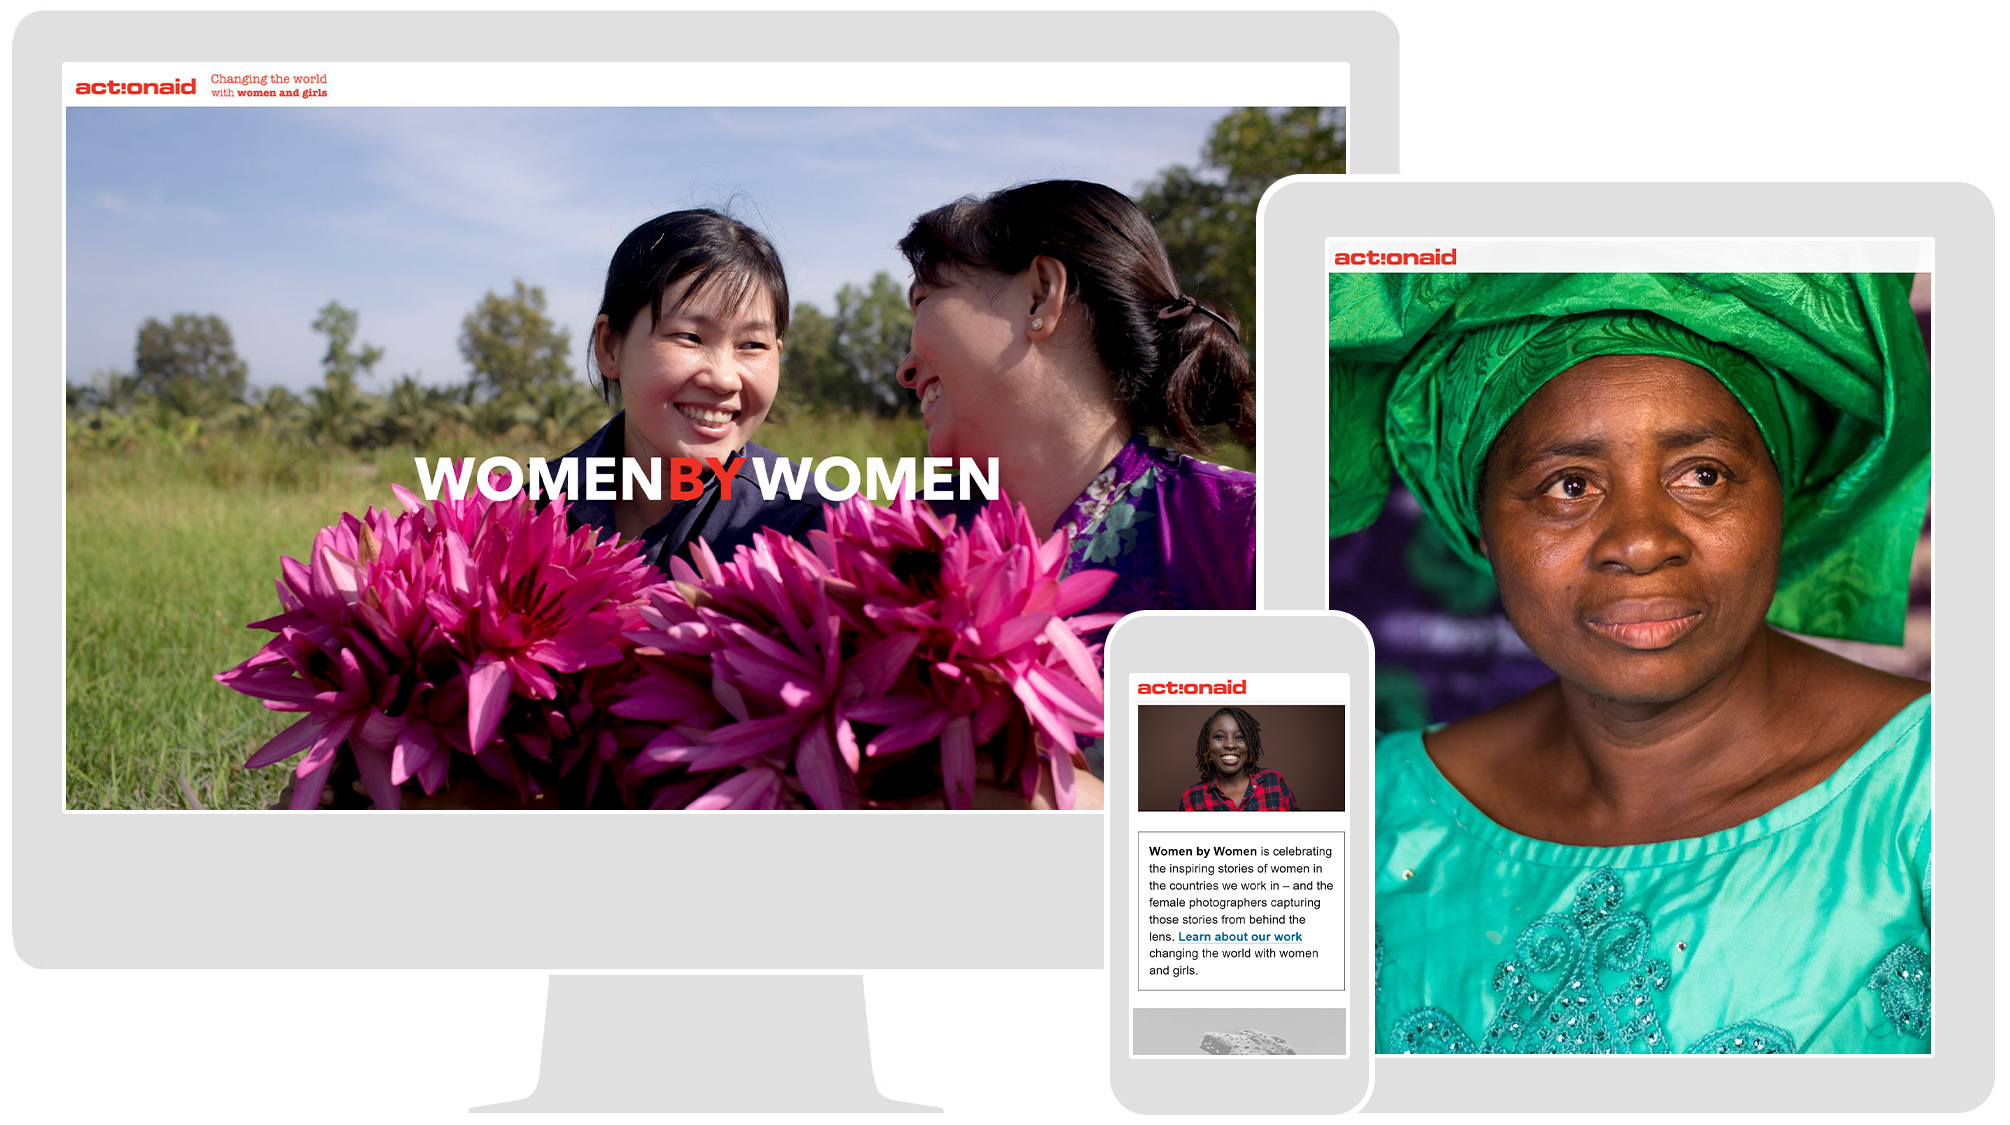 Women by Women, by the Action Aid, renders responsively across all devices